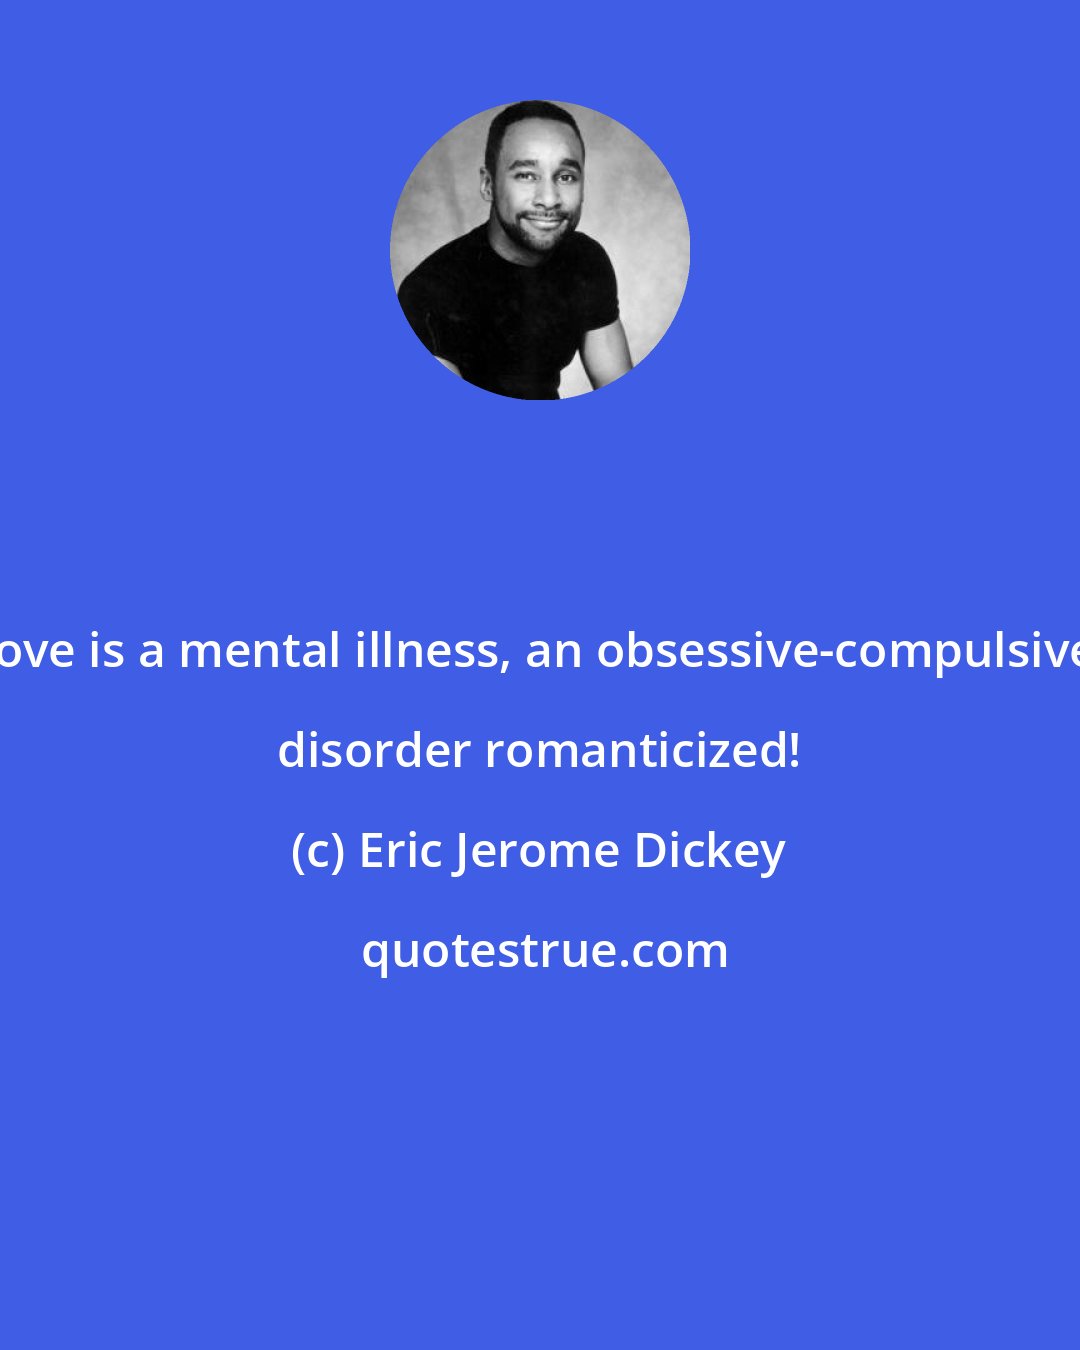 Eric Jerome Dickey: love is a mental illness, an obsessive-compulsive disorder romanticized!